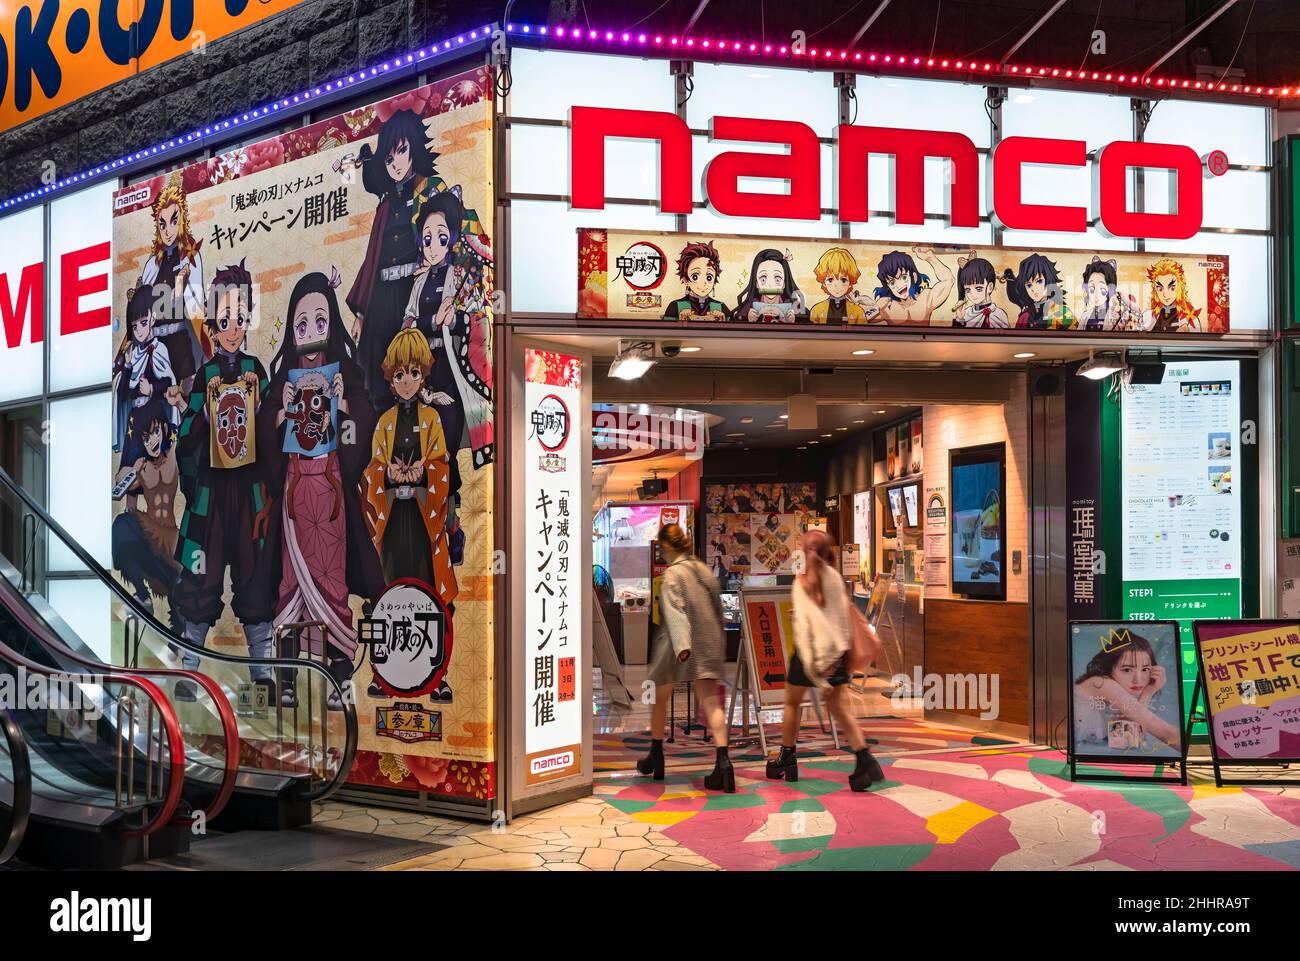 tokyo, japan - october 27 2021: Ikebukuro NAMCO video game arcades and campaign poster and banner depicting characters of Japanese manga and anime Kim Stock Photo